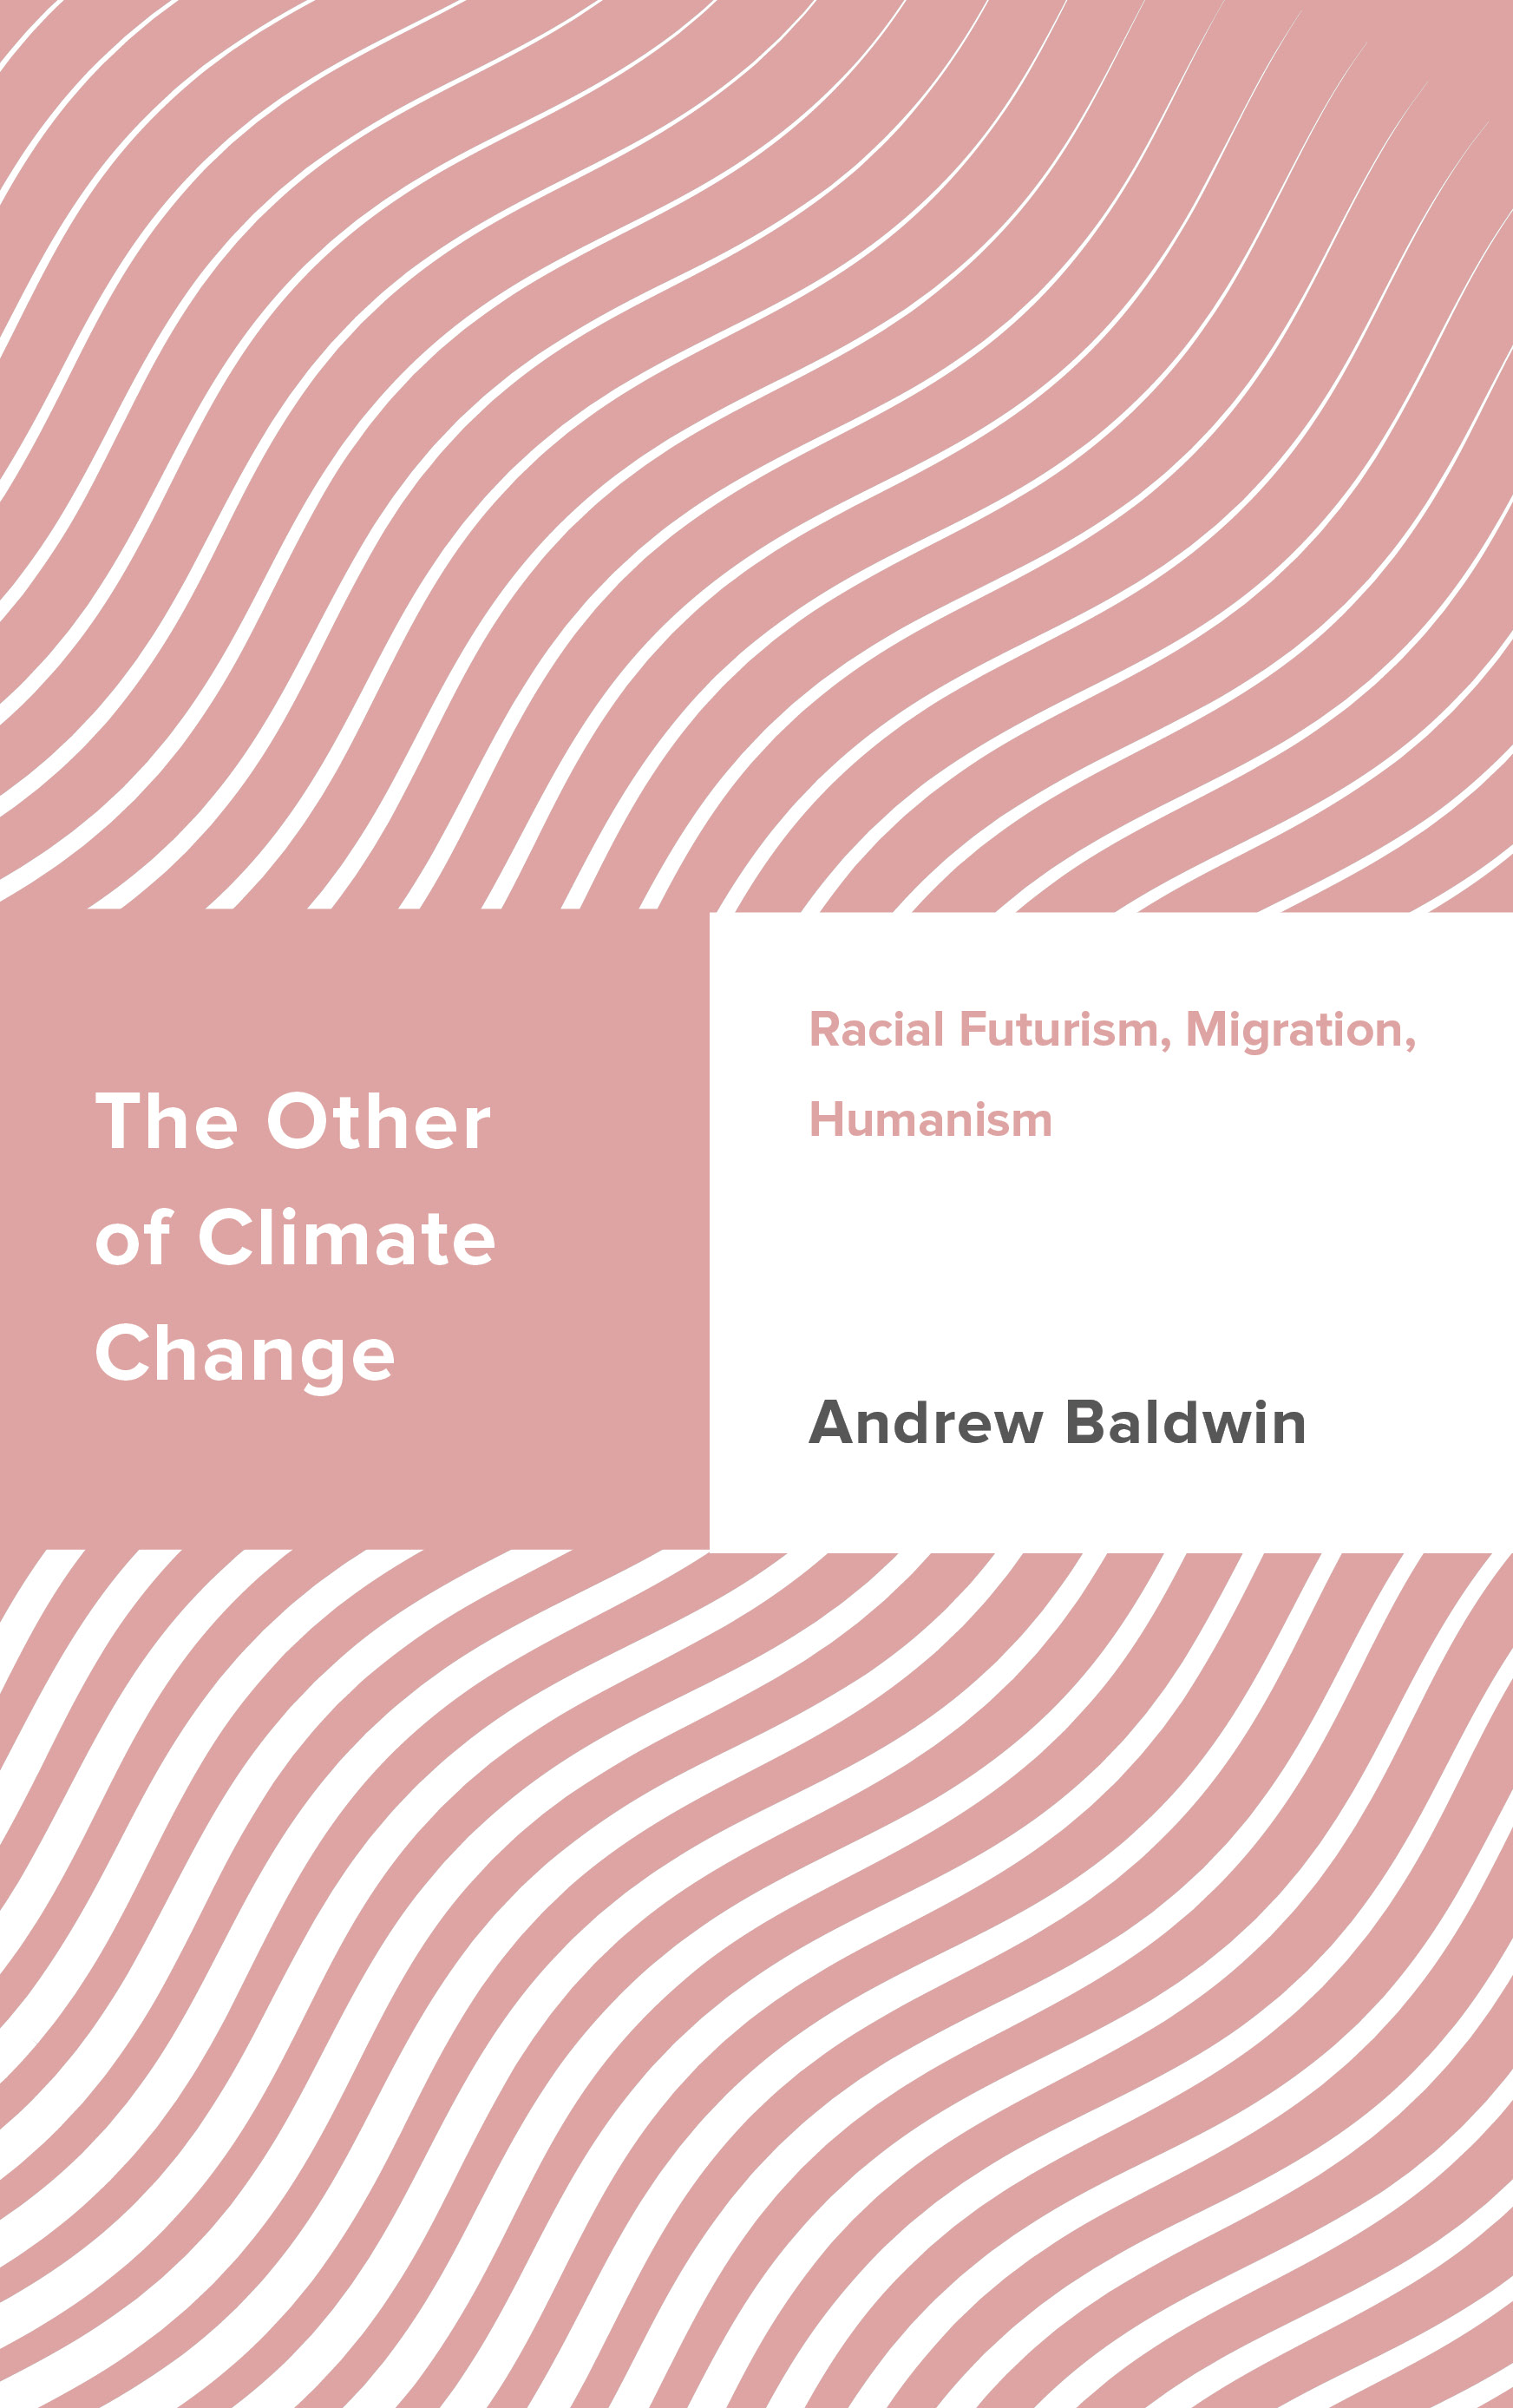 The Other of Climate Change: Racial Futurism, Migration, Humanism